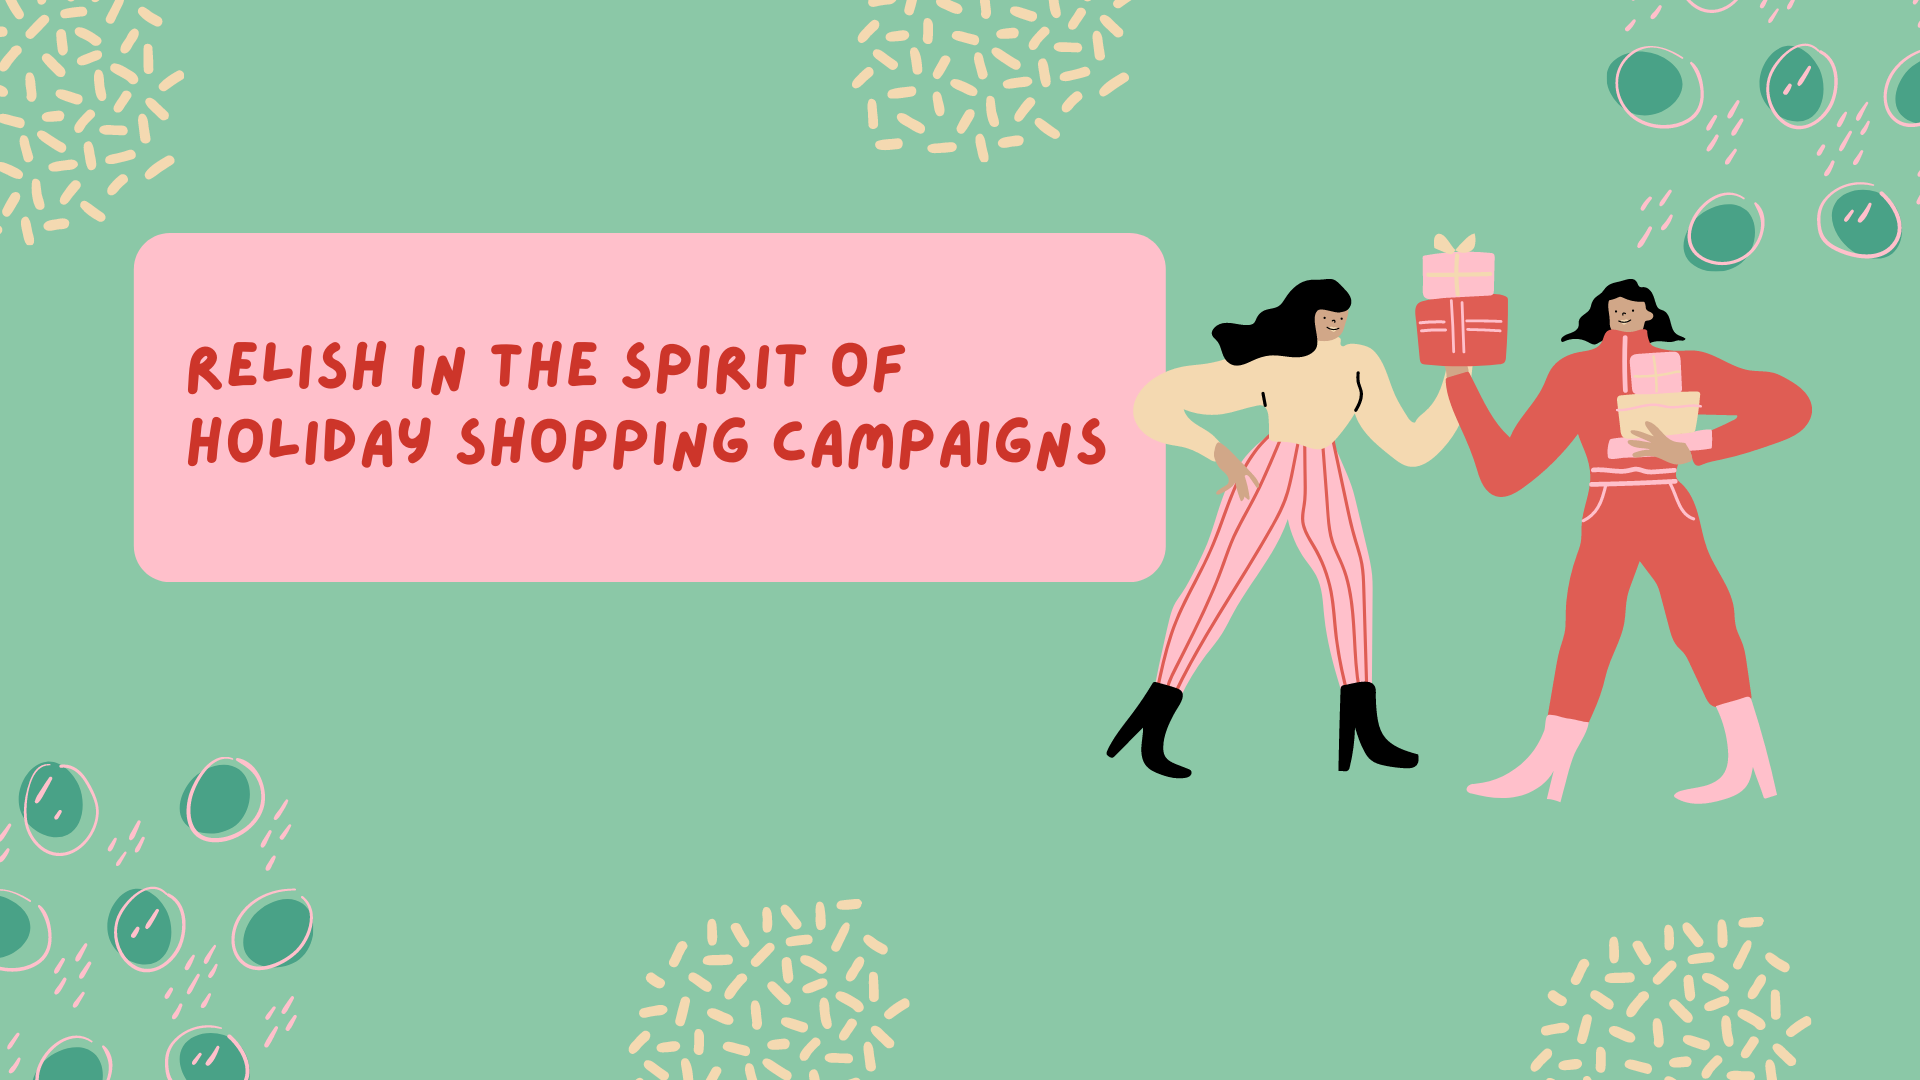 Relish in the spirit of holiday shopping campaigns